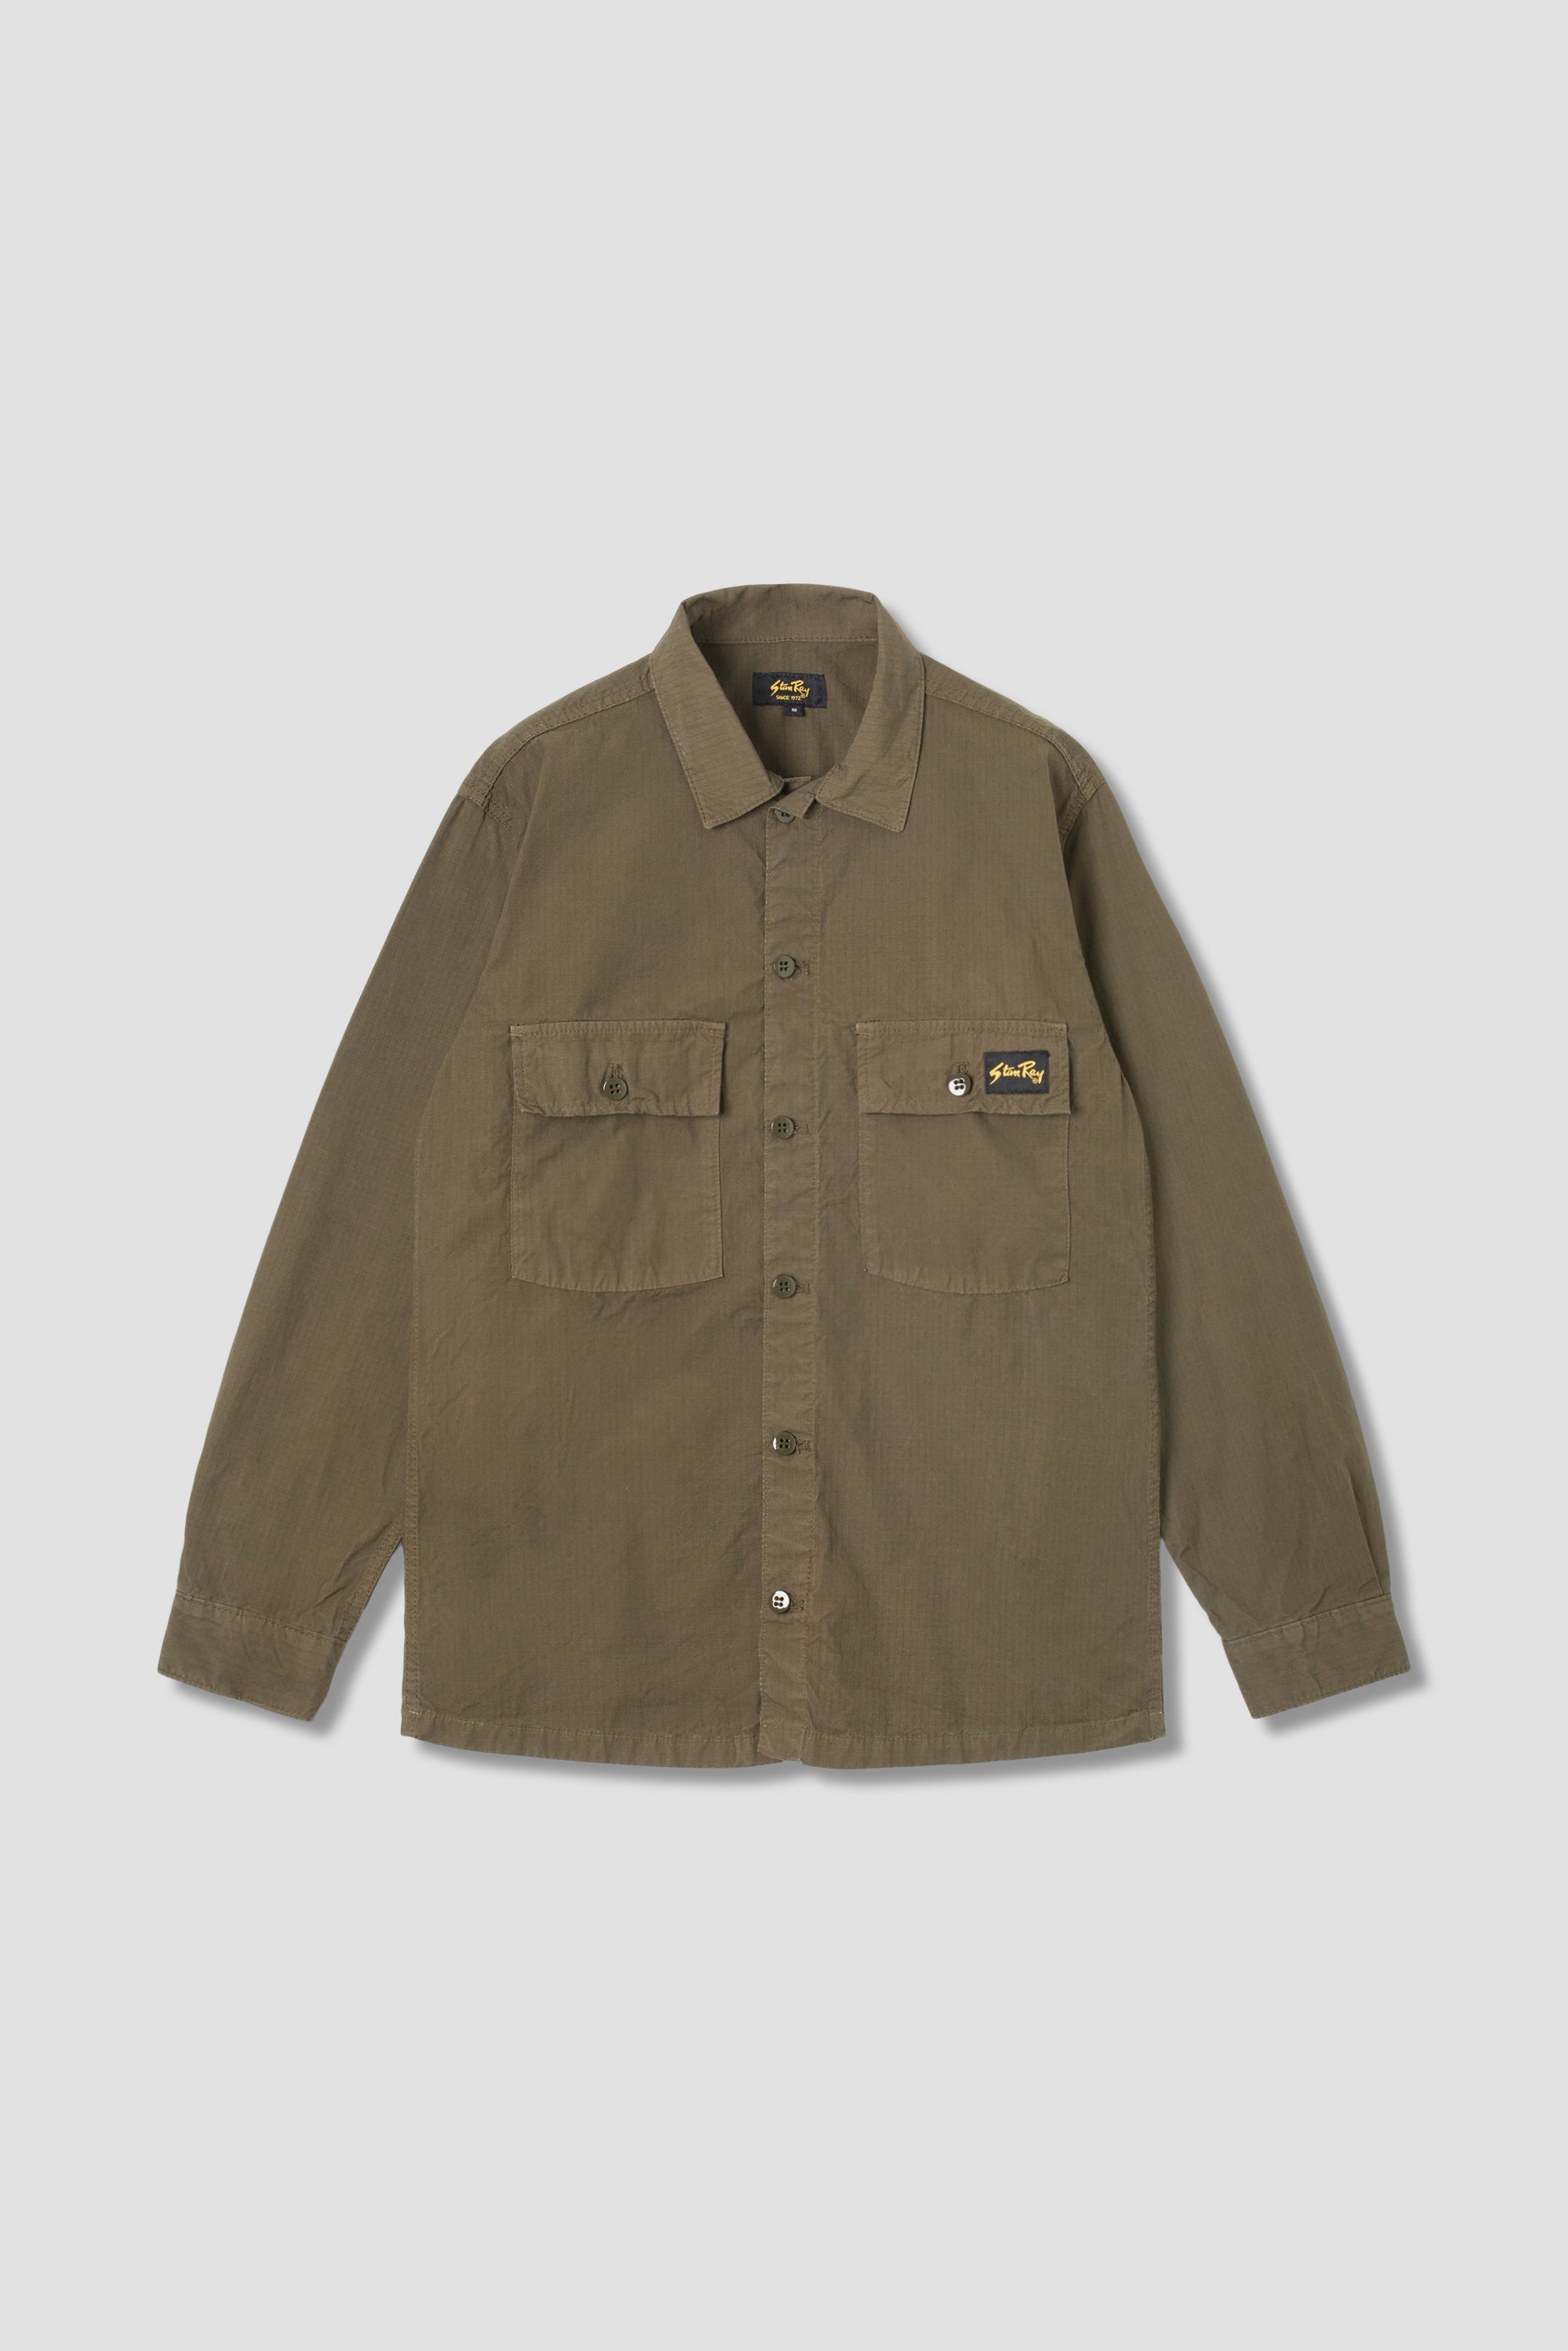 CPO Shirt (Olive Ripstop) – Stan Ray